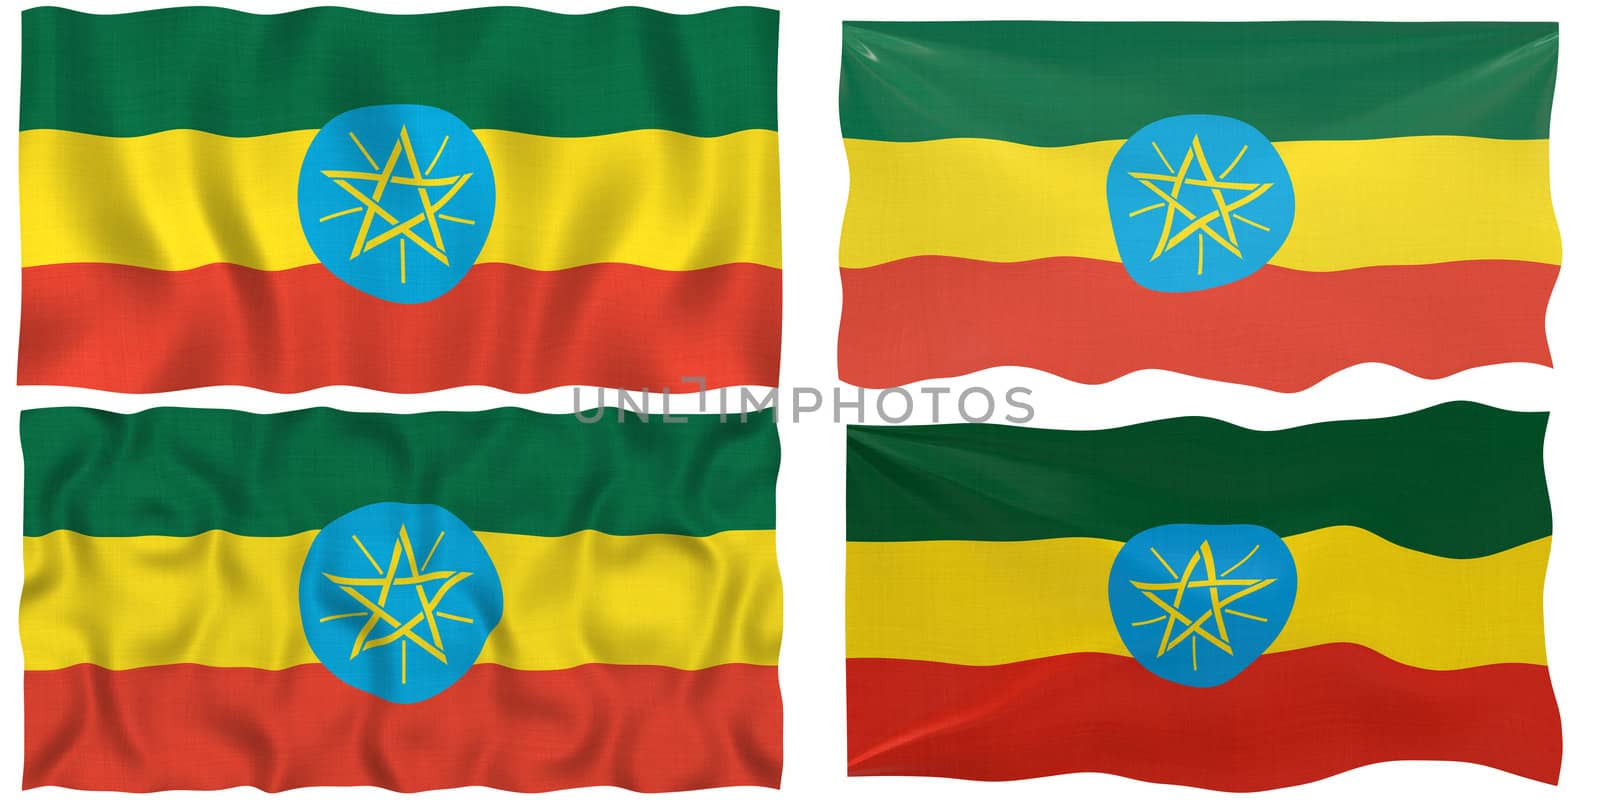 Flag of Ethopia by clearviewstock